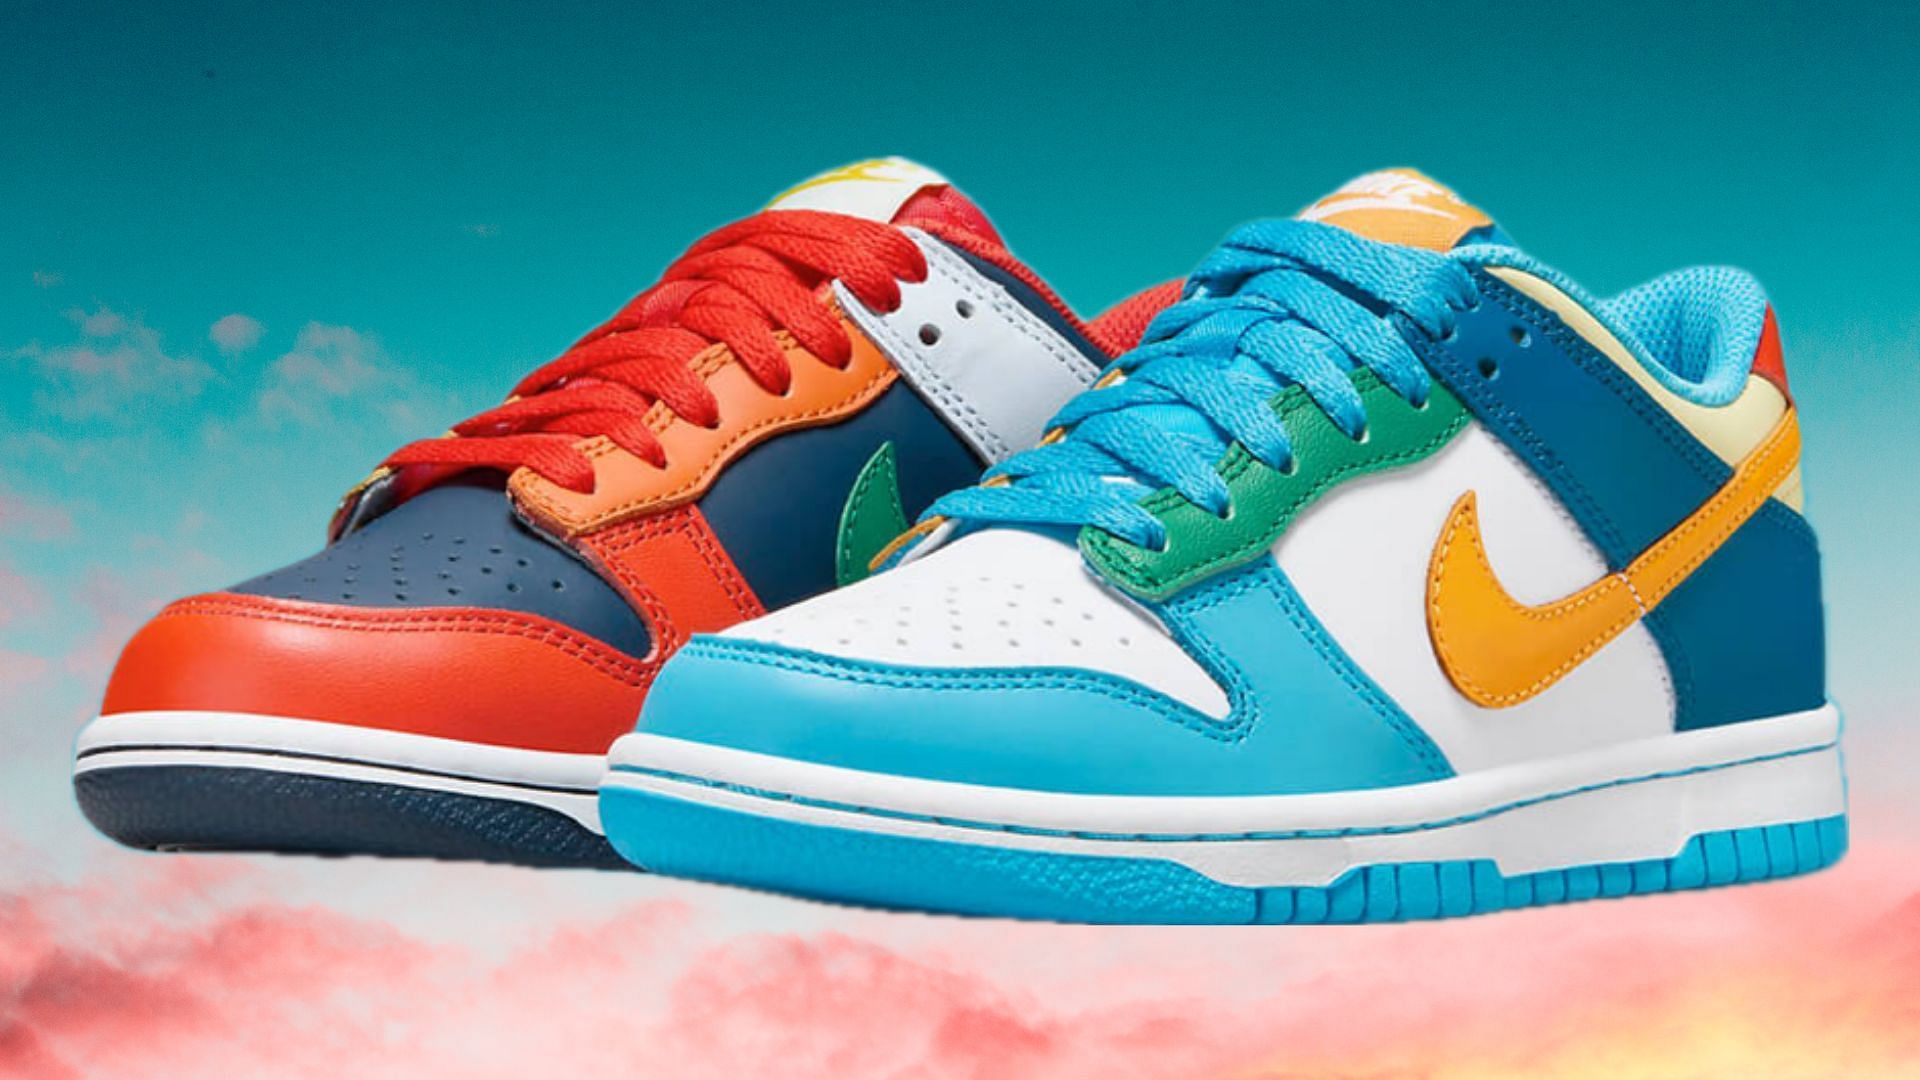 Nike Dunk Low What The? sneakers (Image via Nike)